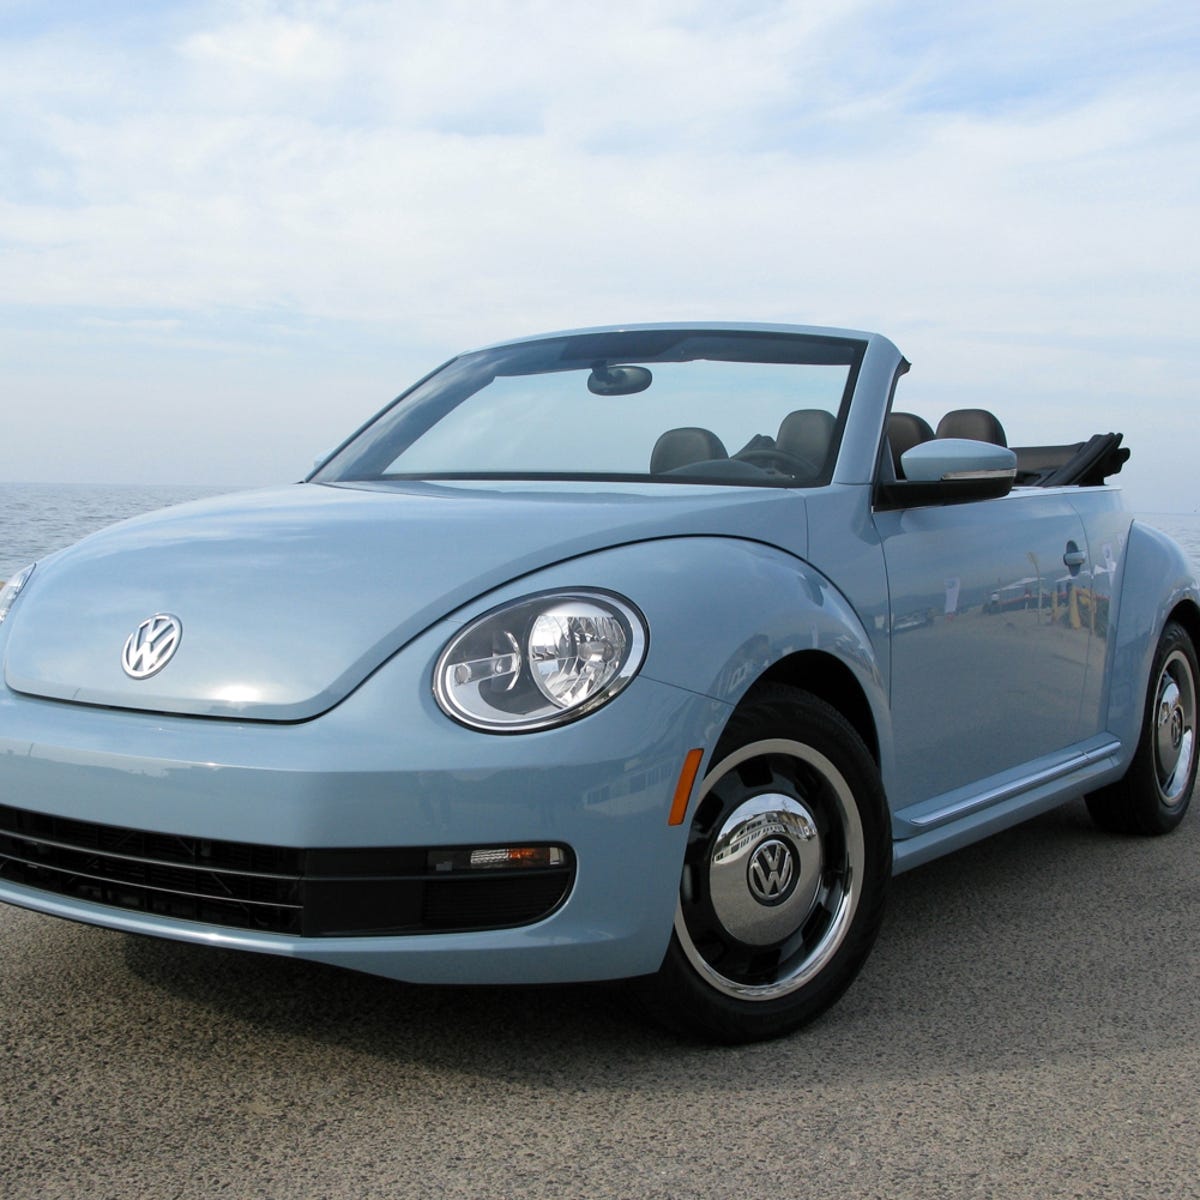 2013 Volkswagen Beetle Convertible review: VW loses Beetle Convertible's  chick car stigma (hands-on) - CNET